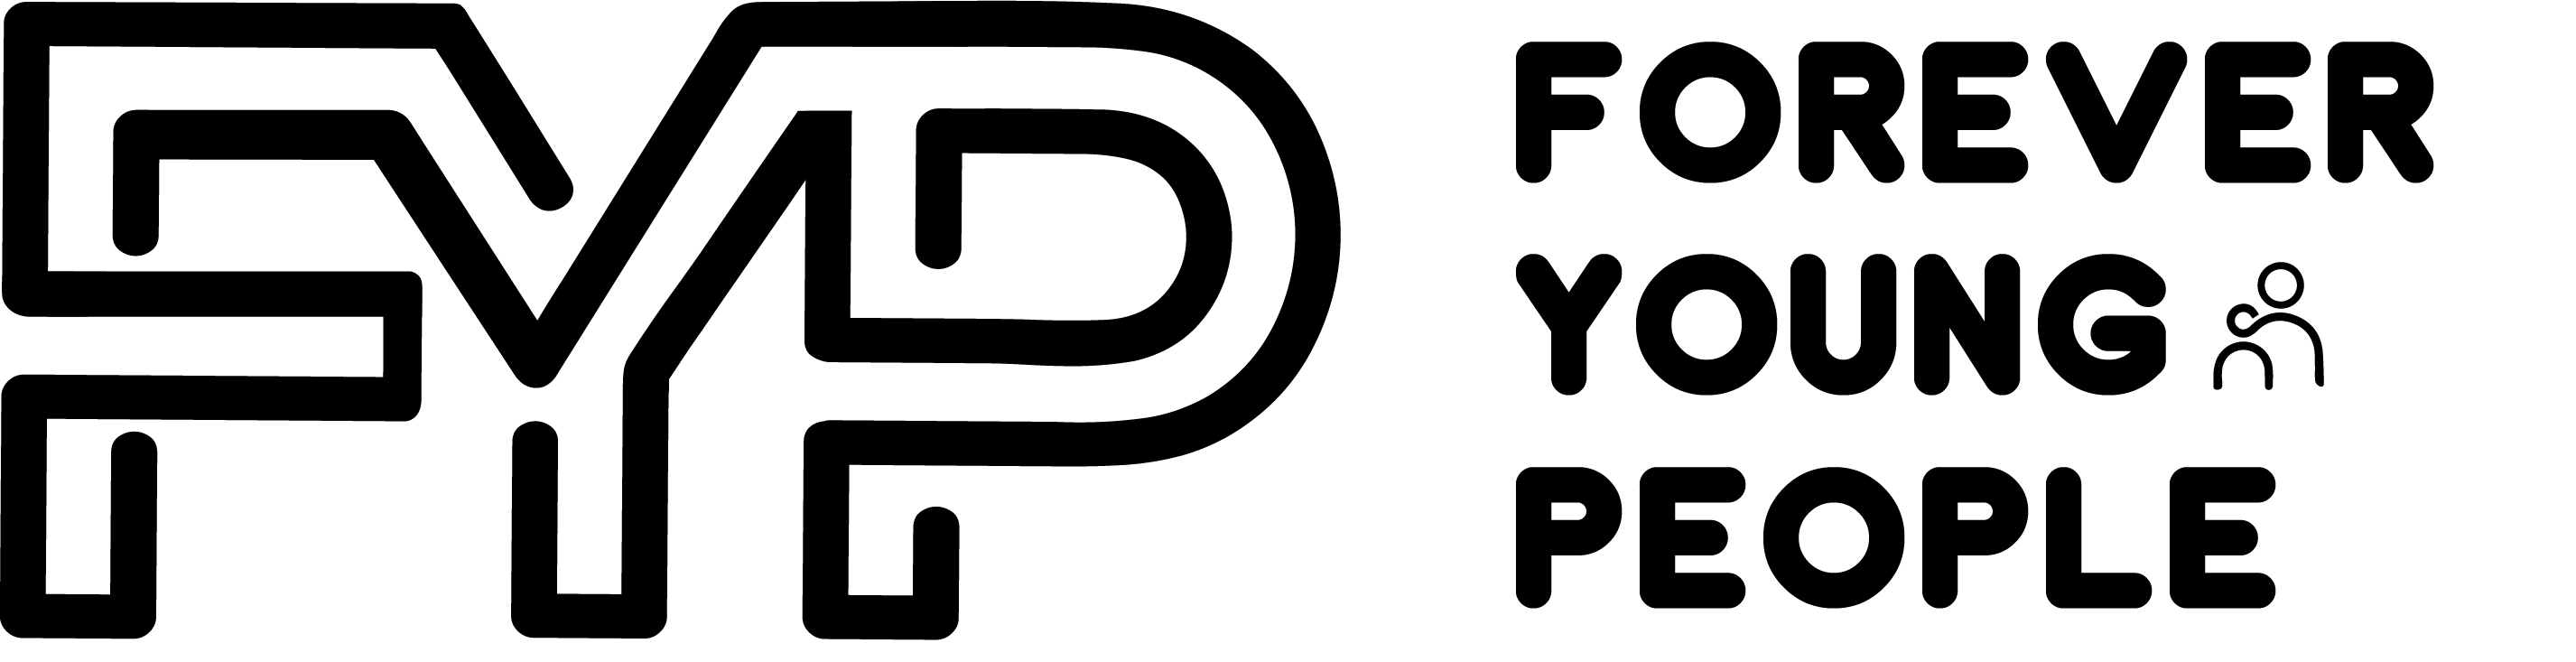 Forever Young People (FYP) logo